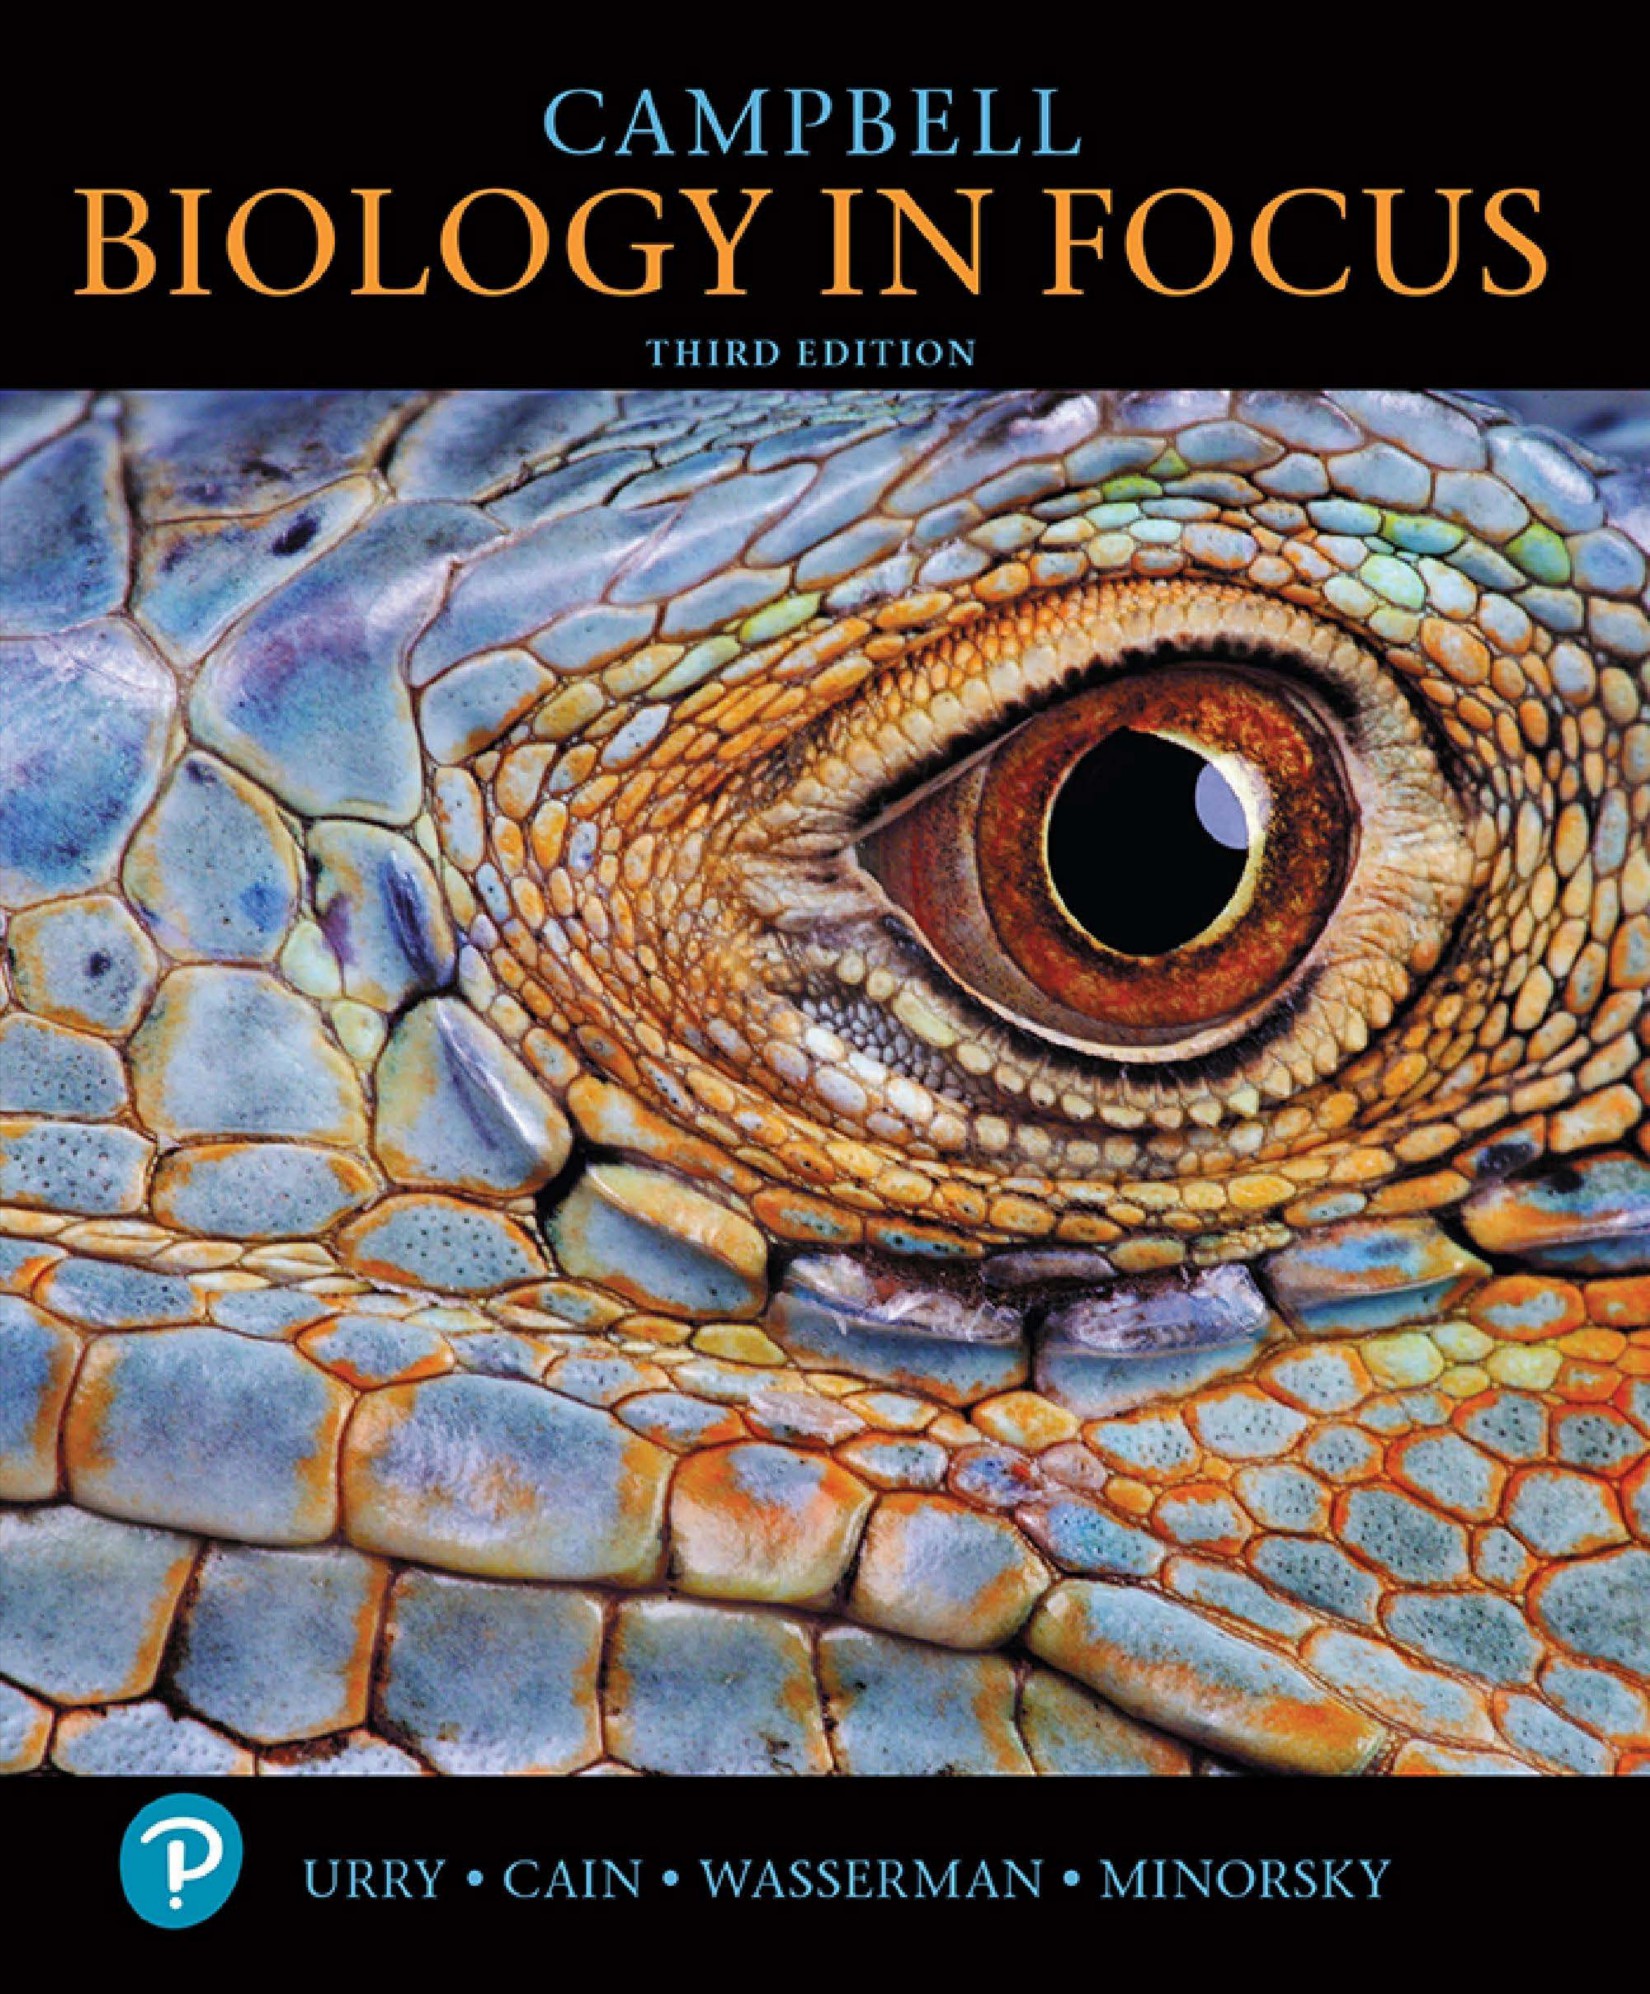 Campbell Biology in Focus 3rd Edition by Lisa A. Urry.jpg